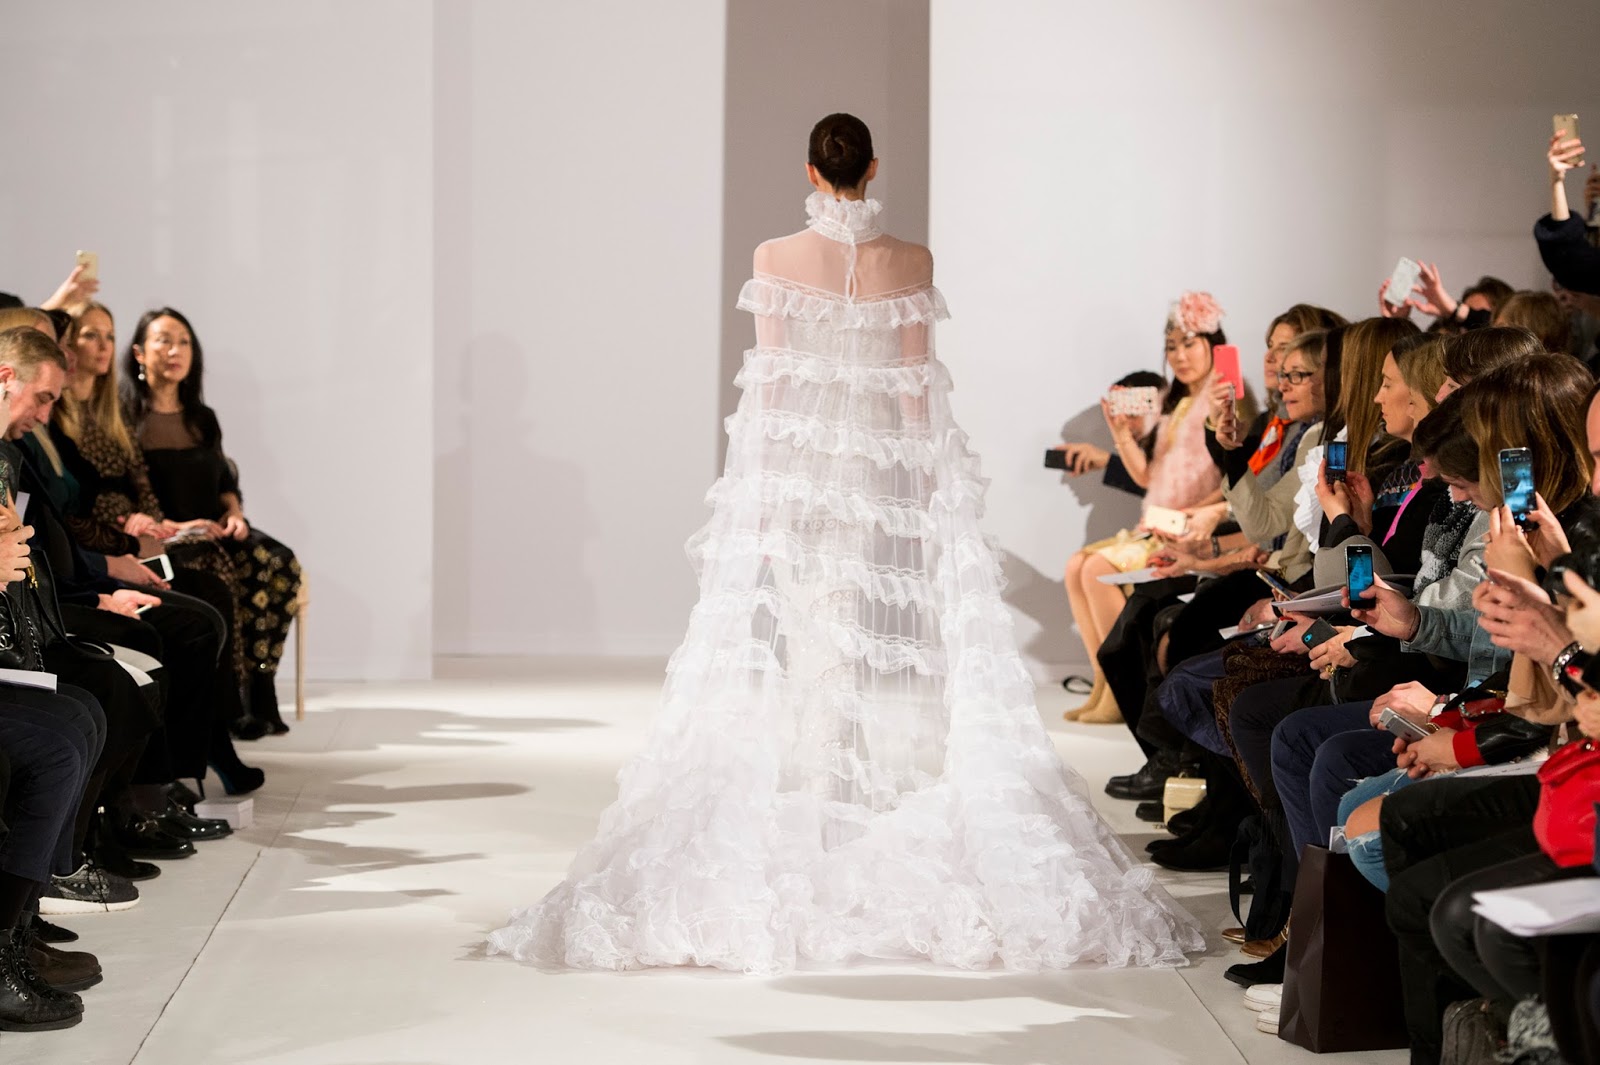 Stunning Gowns by CELIA KRITHARIOTI